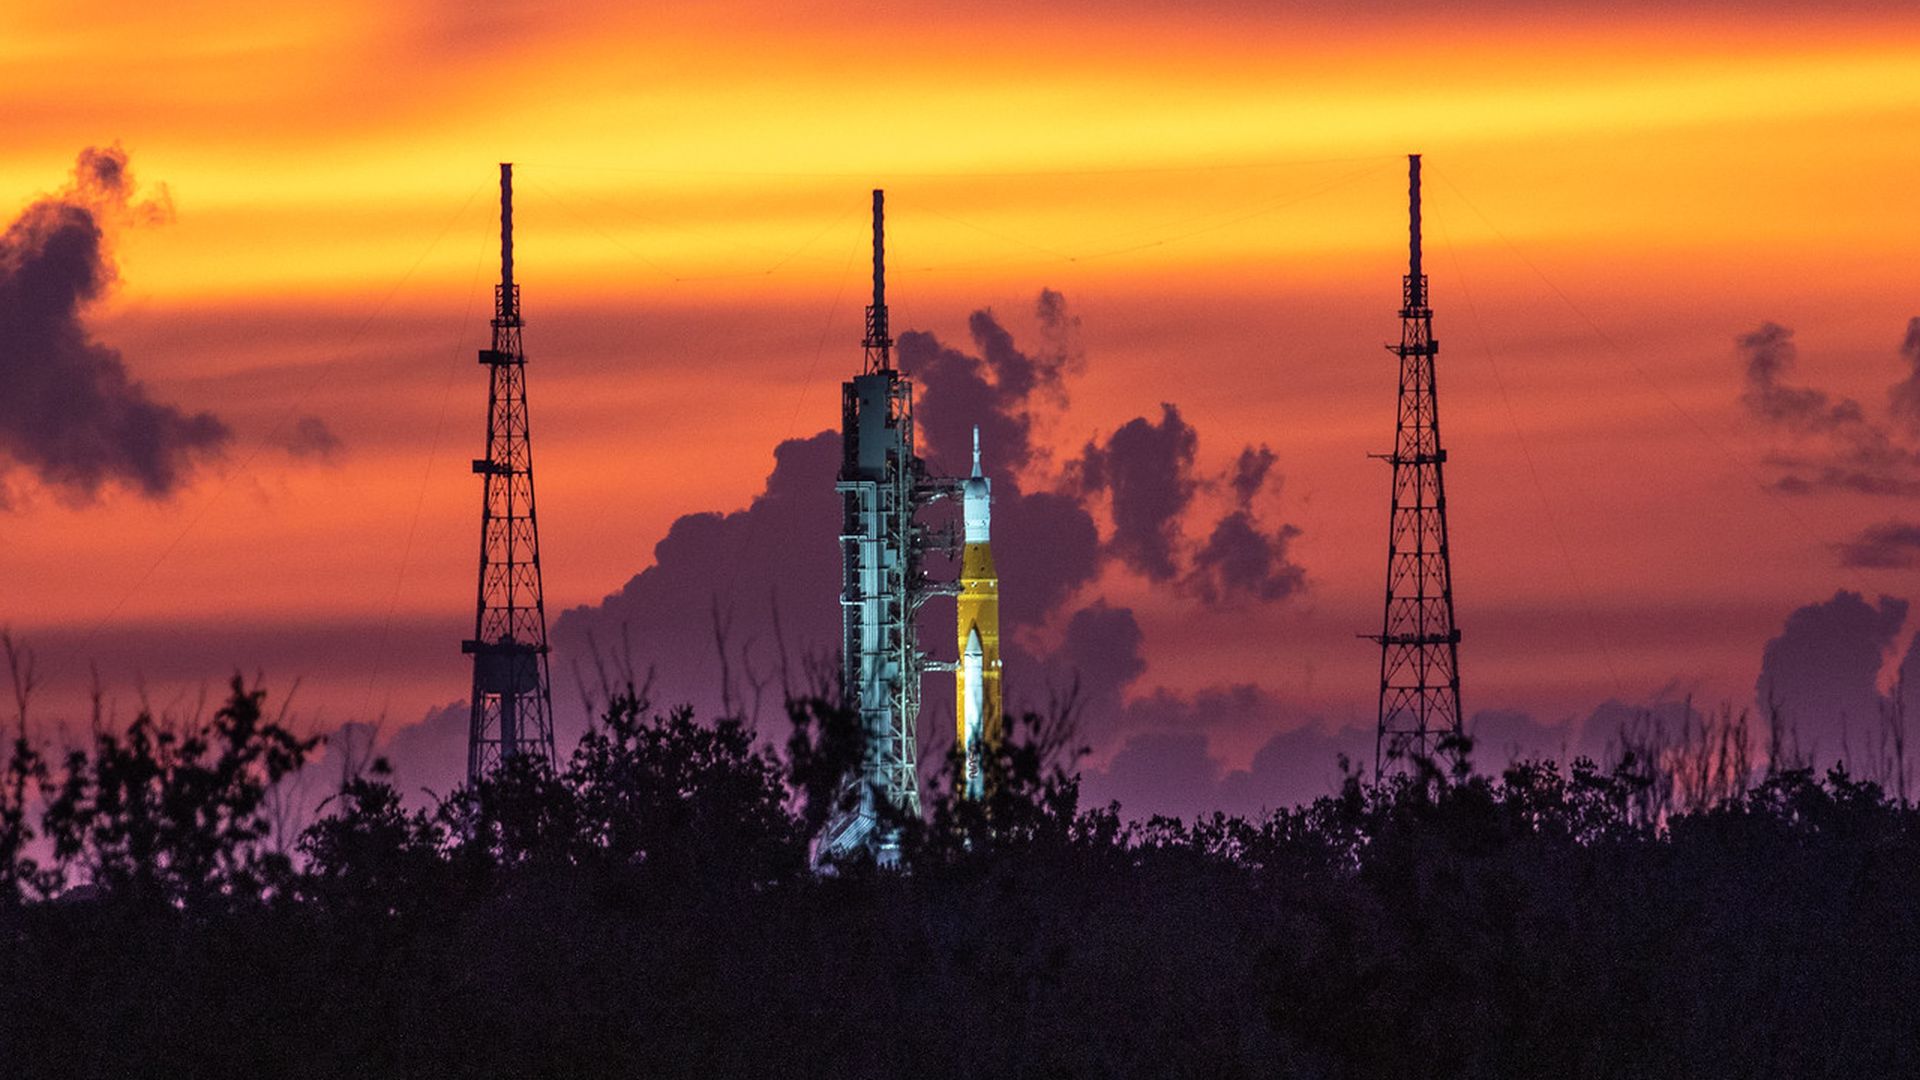 A sunrise photo of the Space Launch System rocket on the launch pad